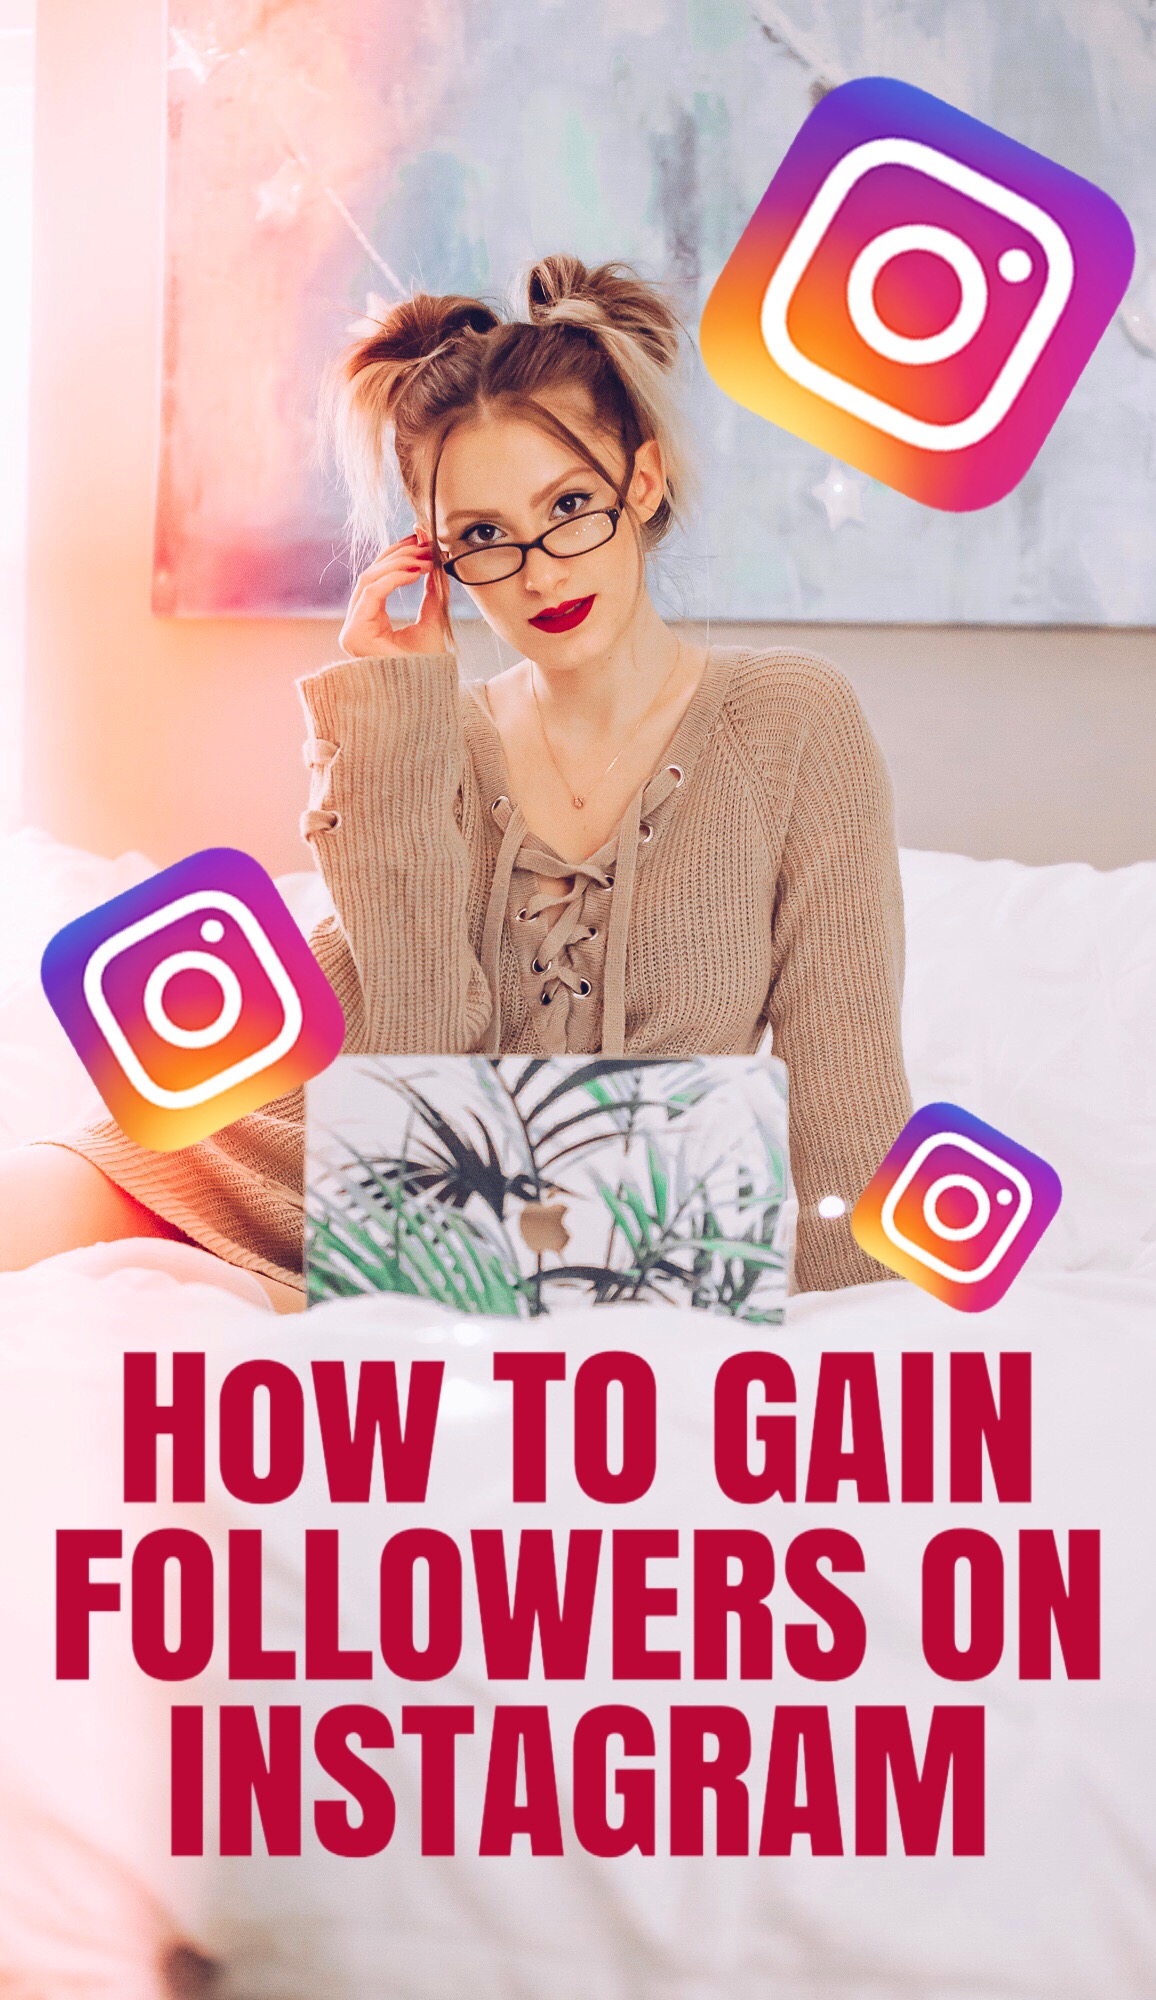 How To Gain Followers on Instagram | North Carolina fashion and lifestyle blogger and youtuber Jessica Linn sharing social media growth strategies to grow your personal brand or business.